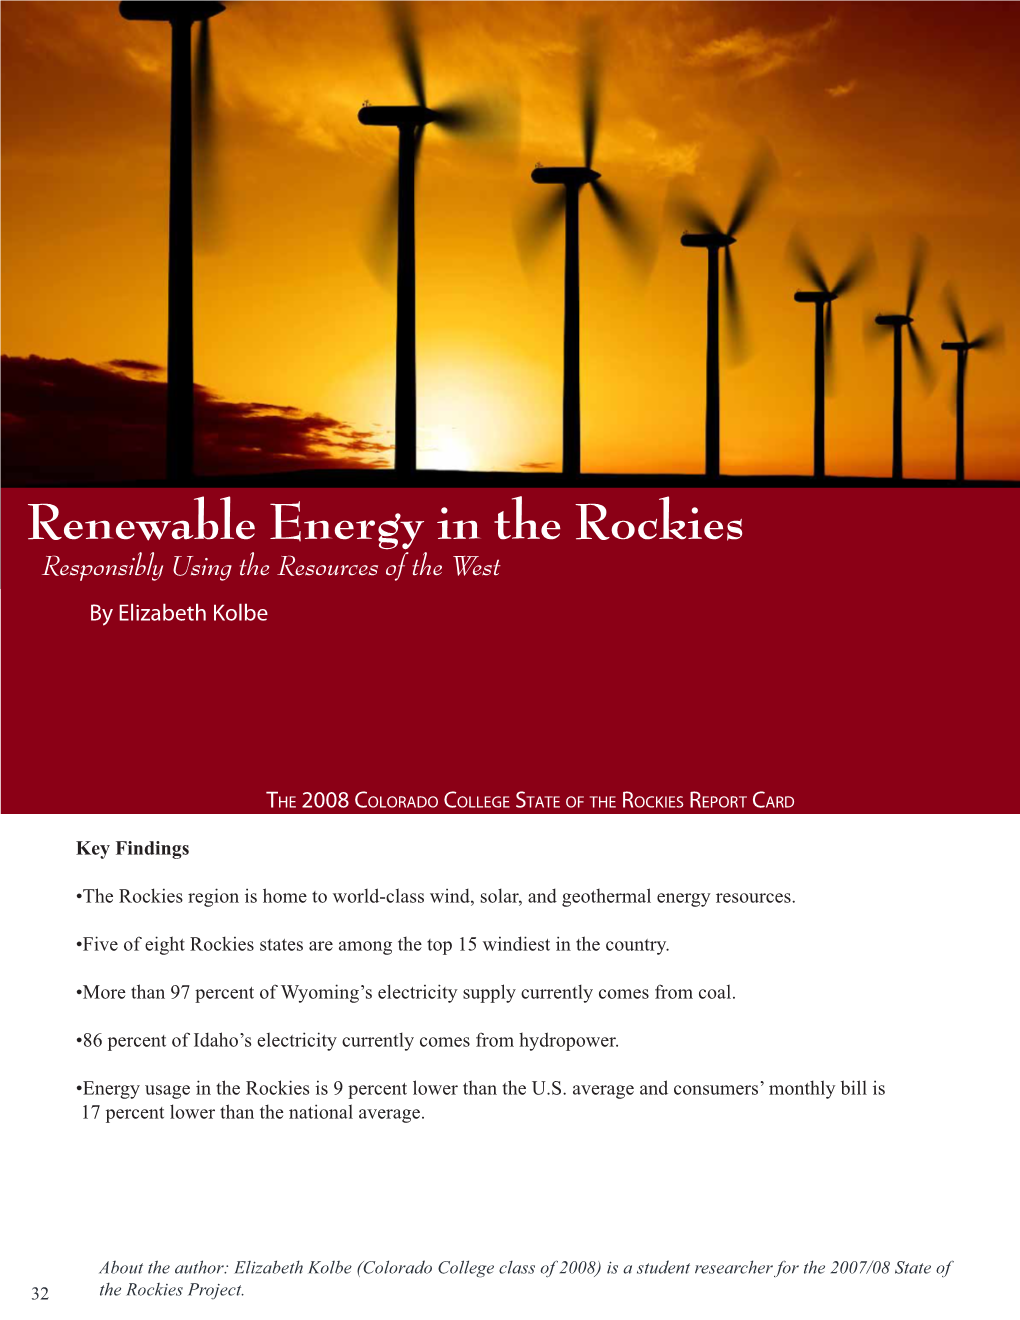 Renewable Energy in the Rockies: Responsibly Using the Resources of the West